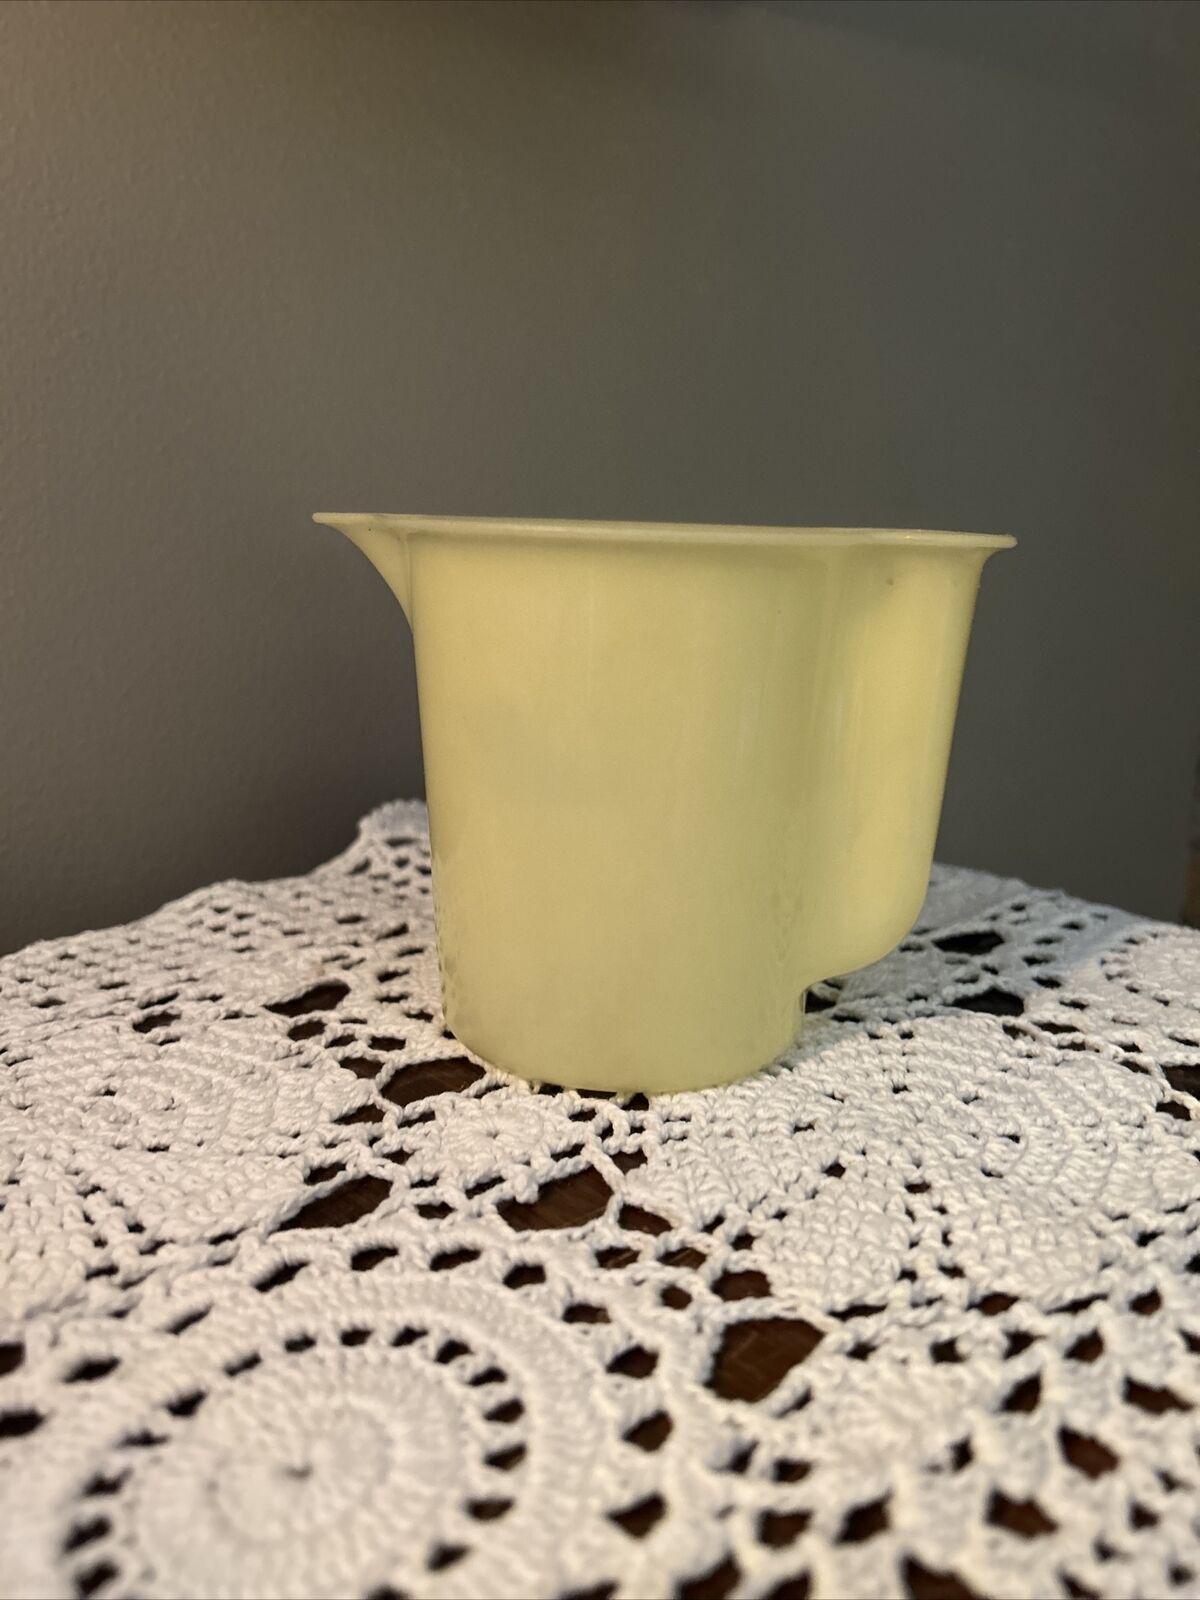 VTG Tupperware Yellow Plastic Creamer Pitcher Without lid.